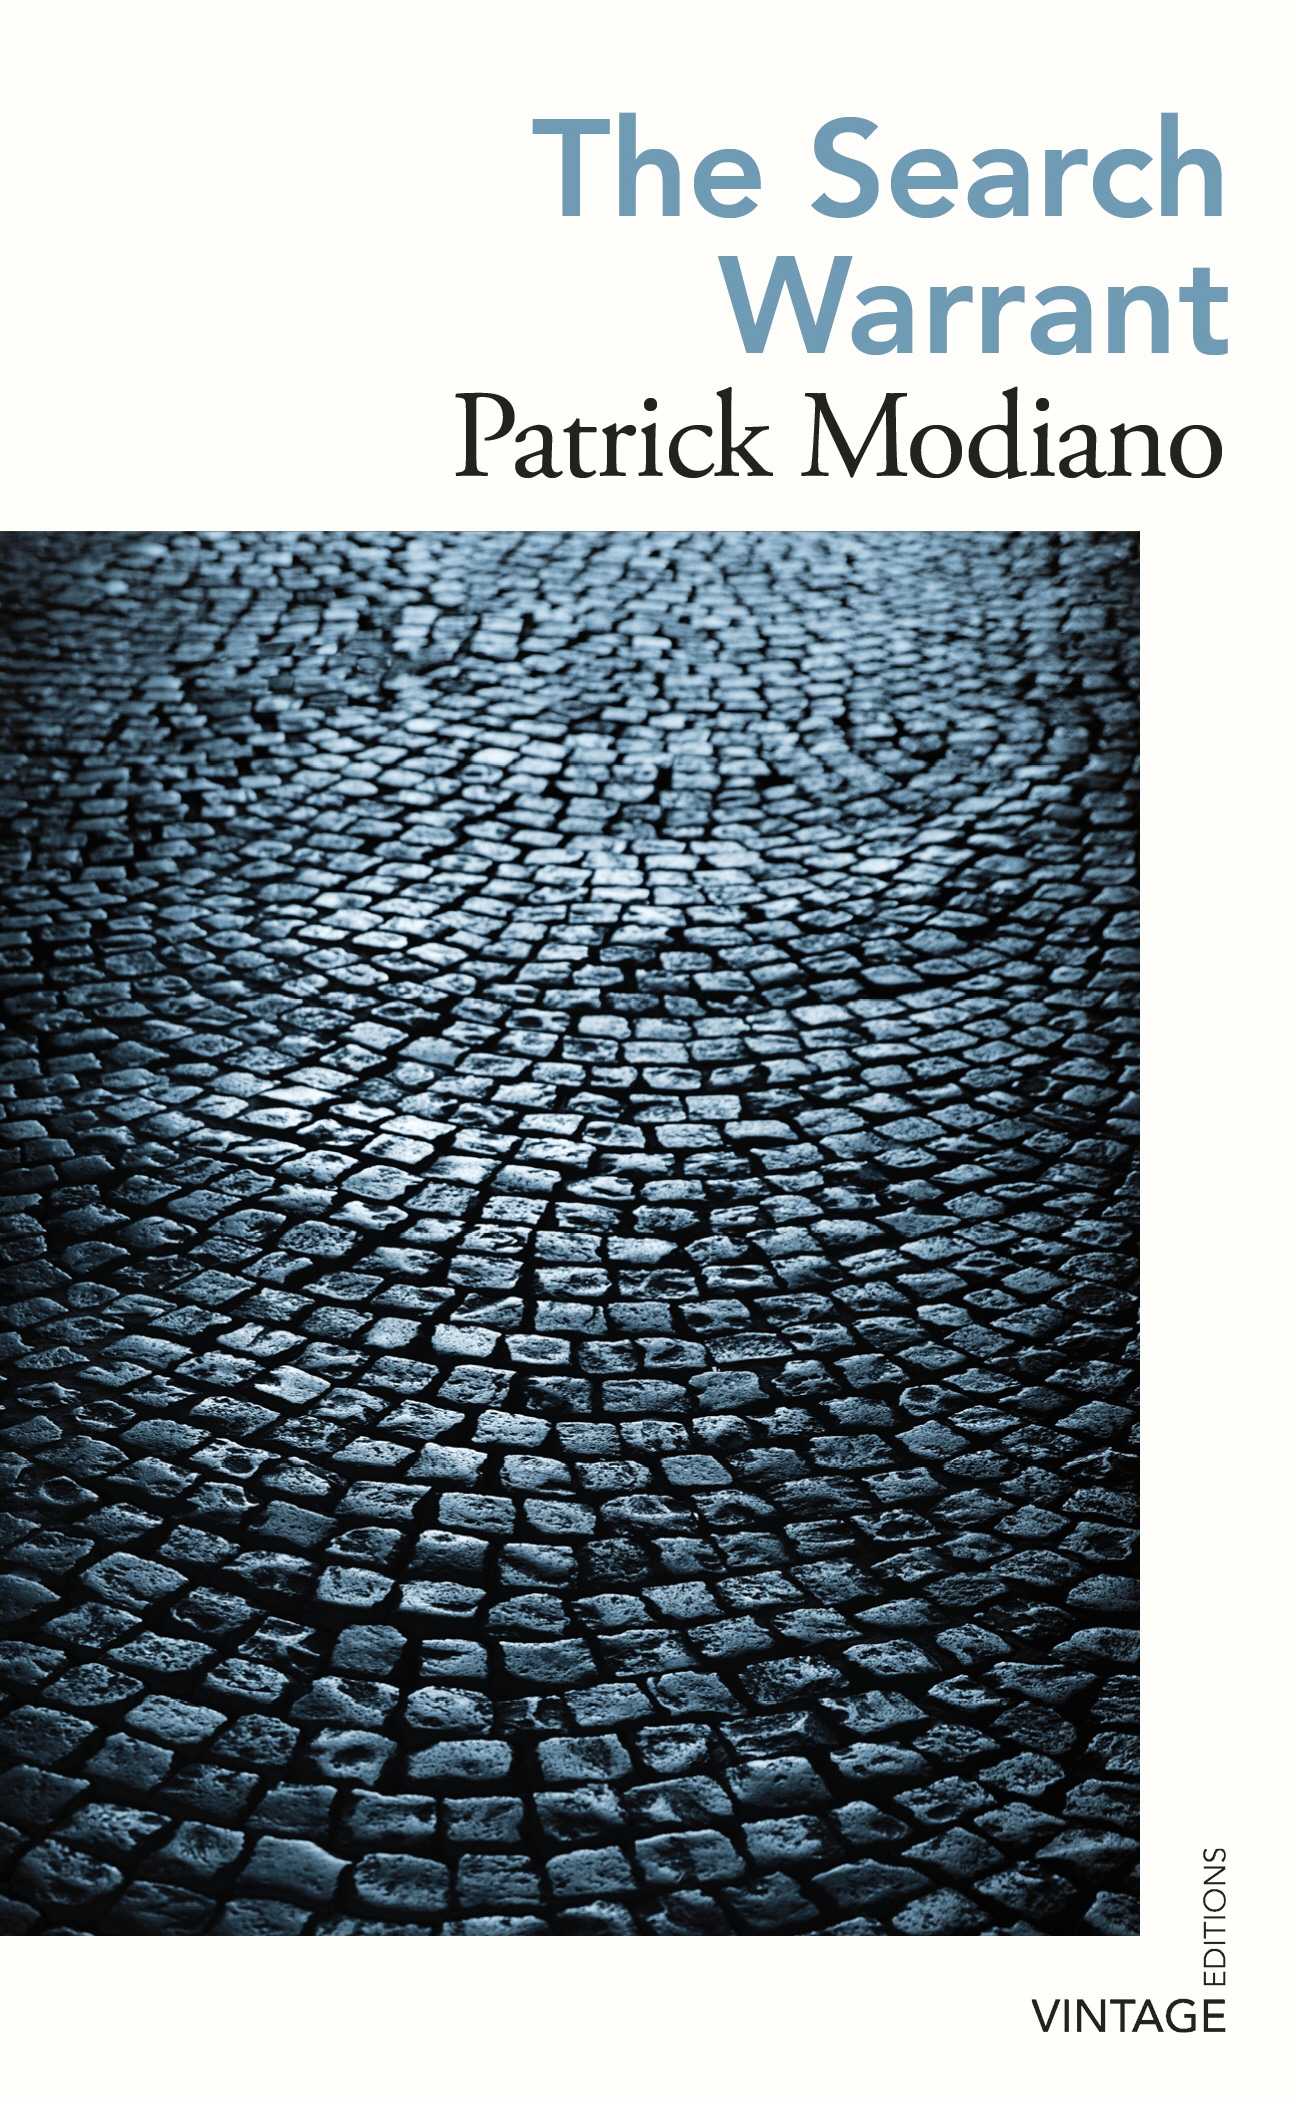 Book “The Search Warrant” by Patrick Modiano — September 3, 2020